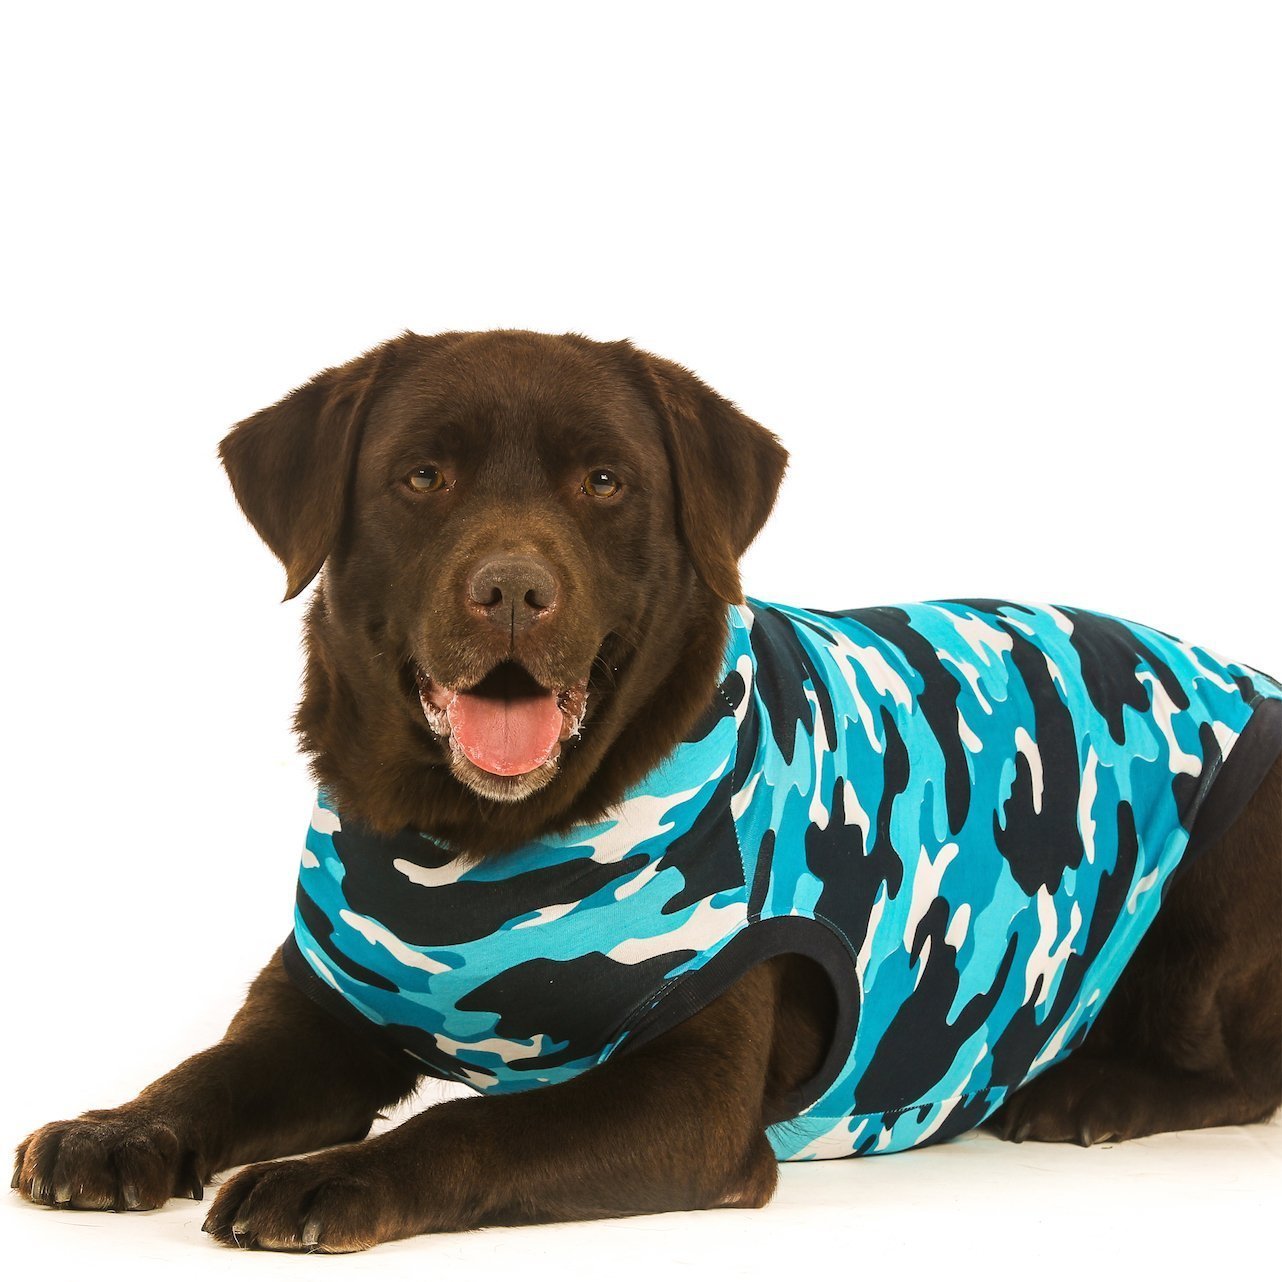 Suitical Recovery Suit for Dogs, Blue Camo, Medium